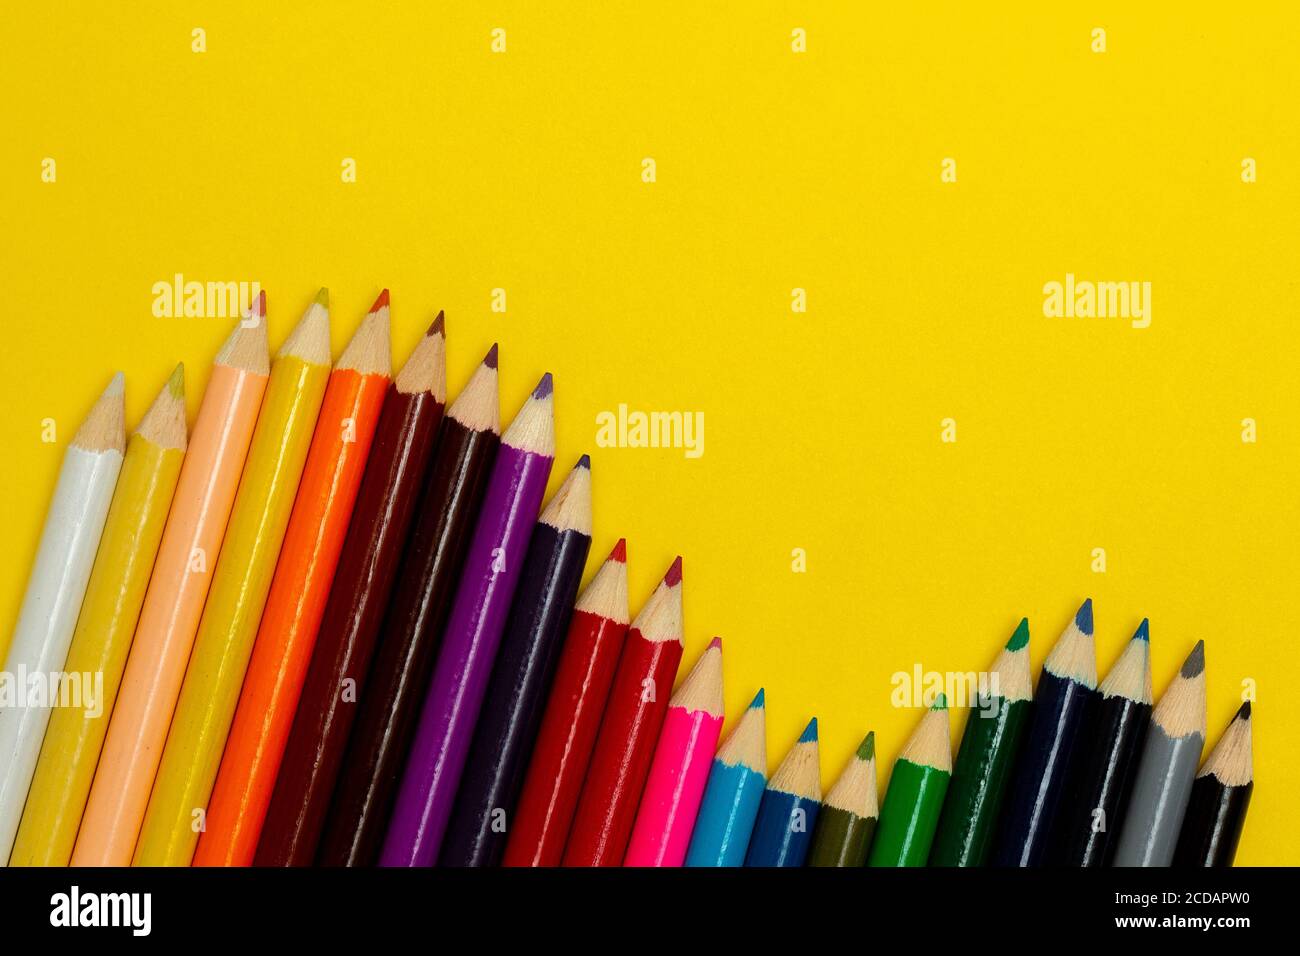 Overhead view of colorful pencils on yellow backdrop. Poster design idea is.  Stock Photo